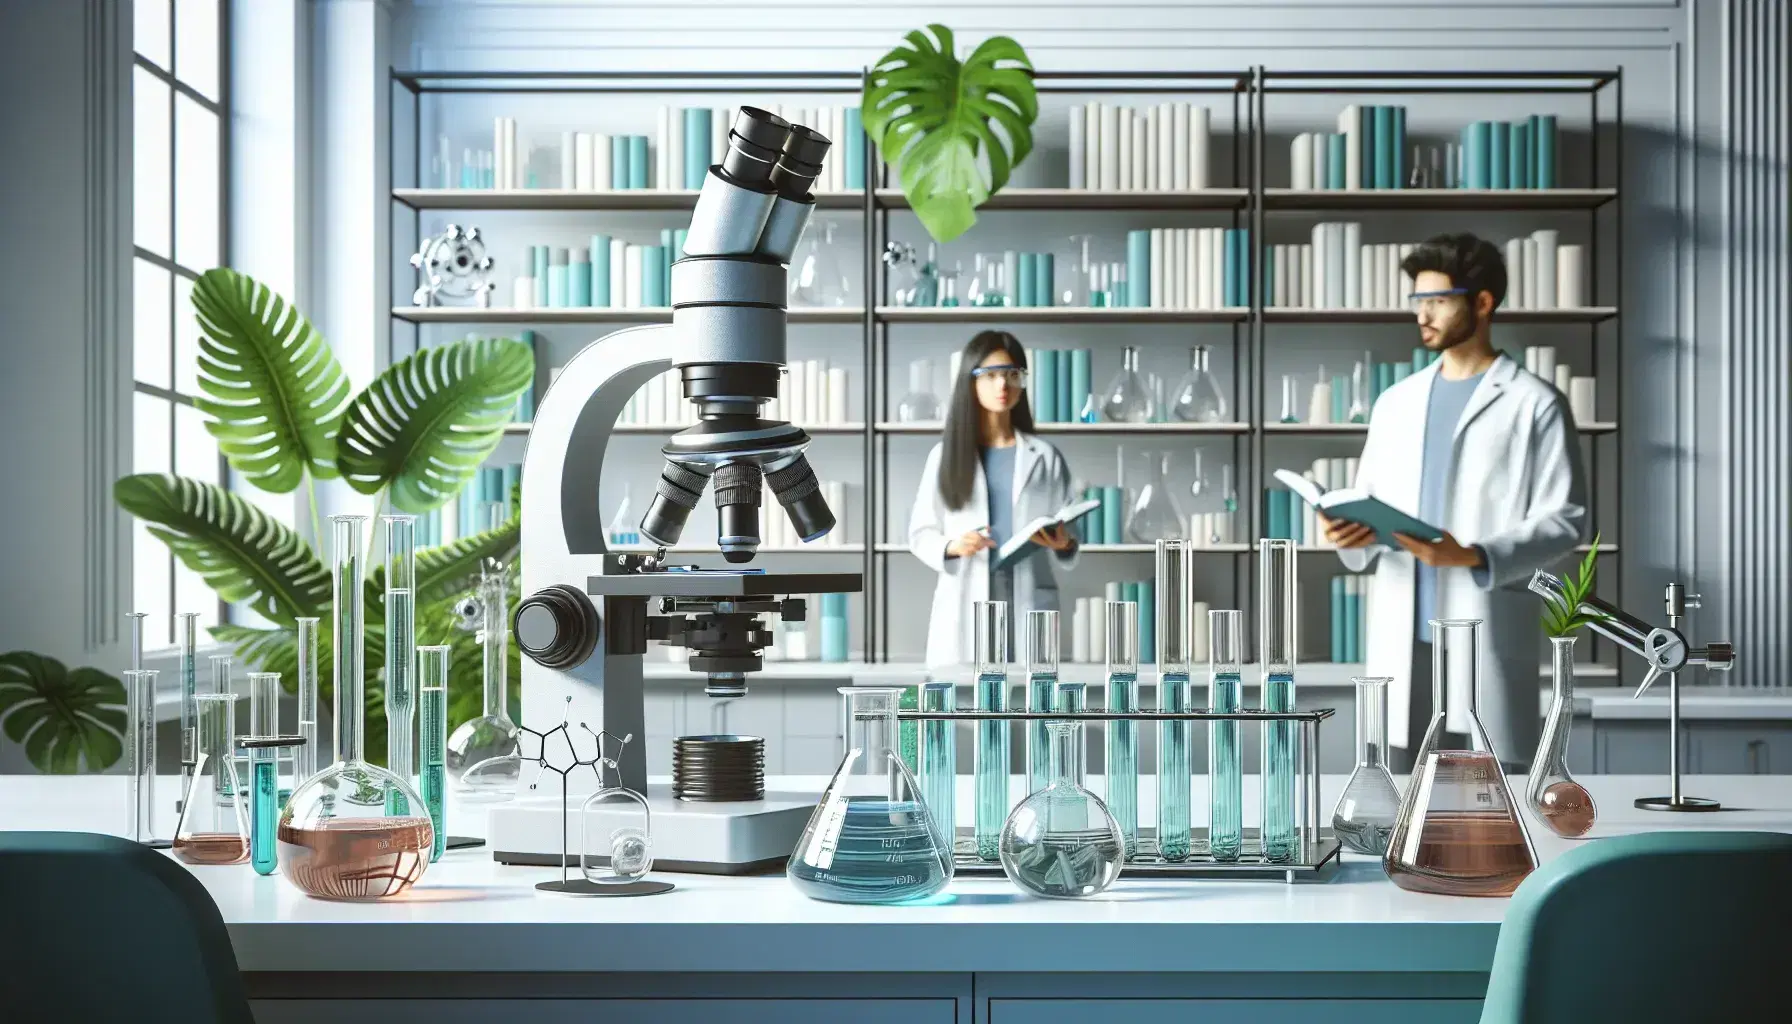 Modern laboratory with microscope, beakers with colored liquids, green plant, researchers in lab coats and scientific equipment.